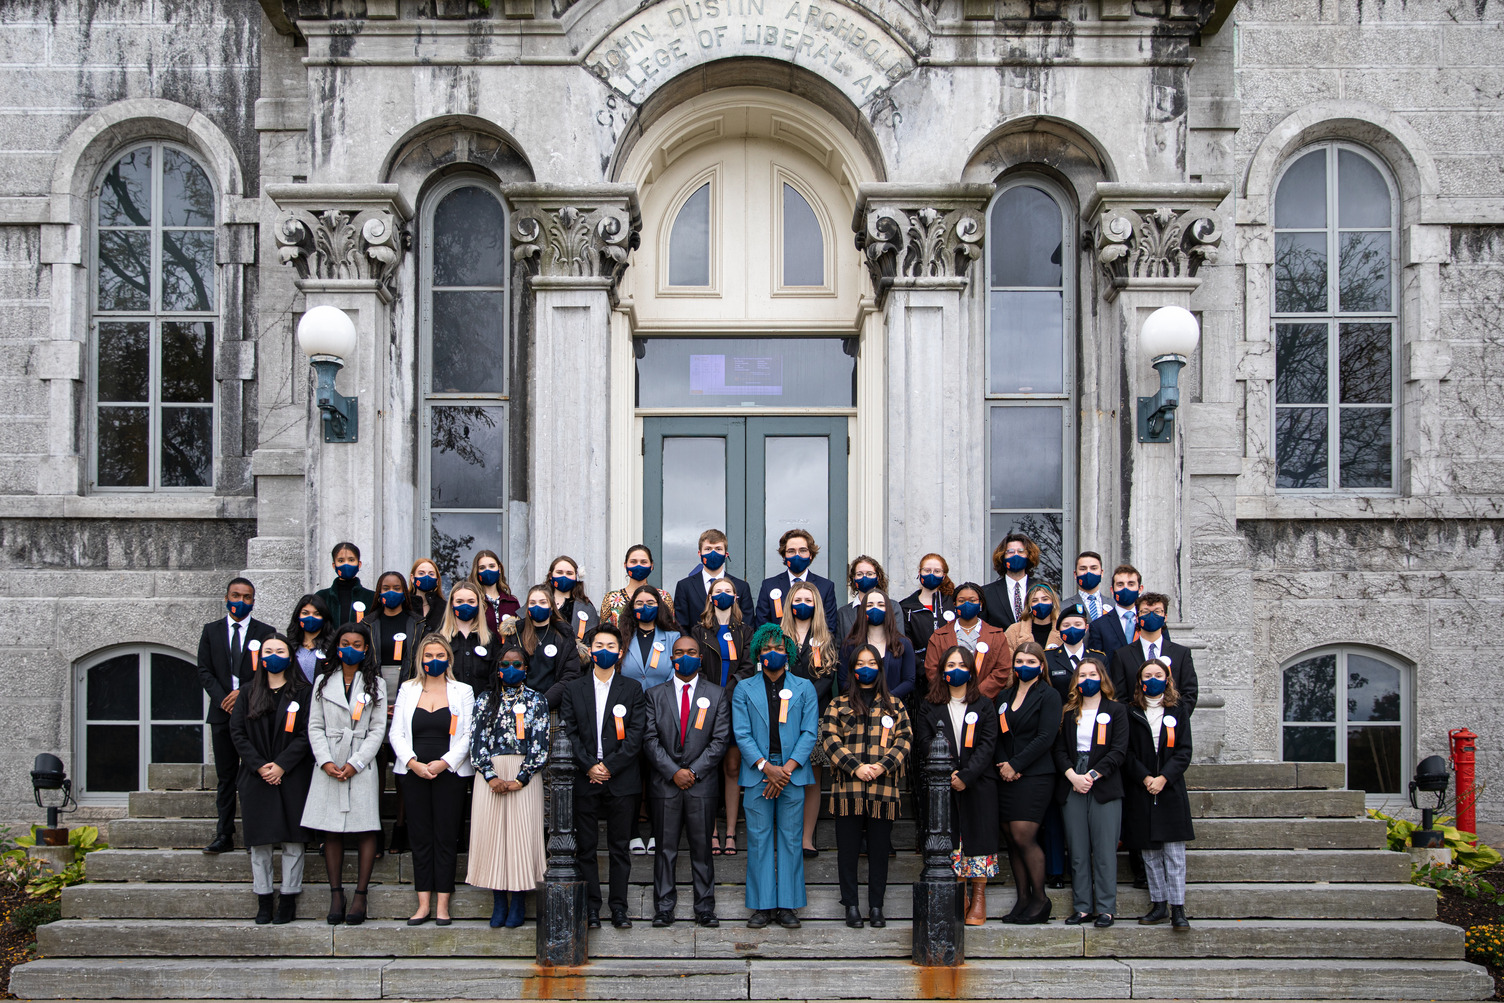 group photo of 37 students standing in front of an old gray stone building.